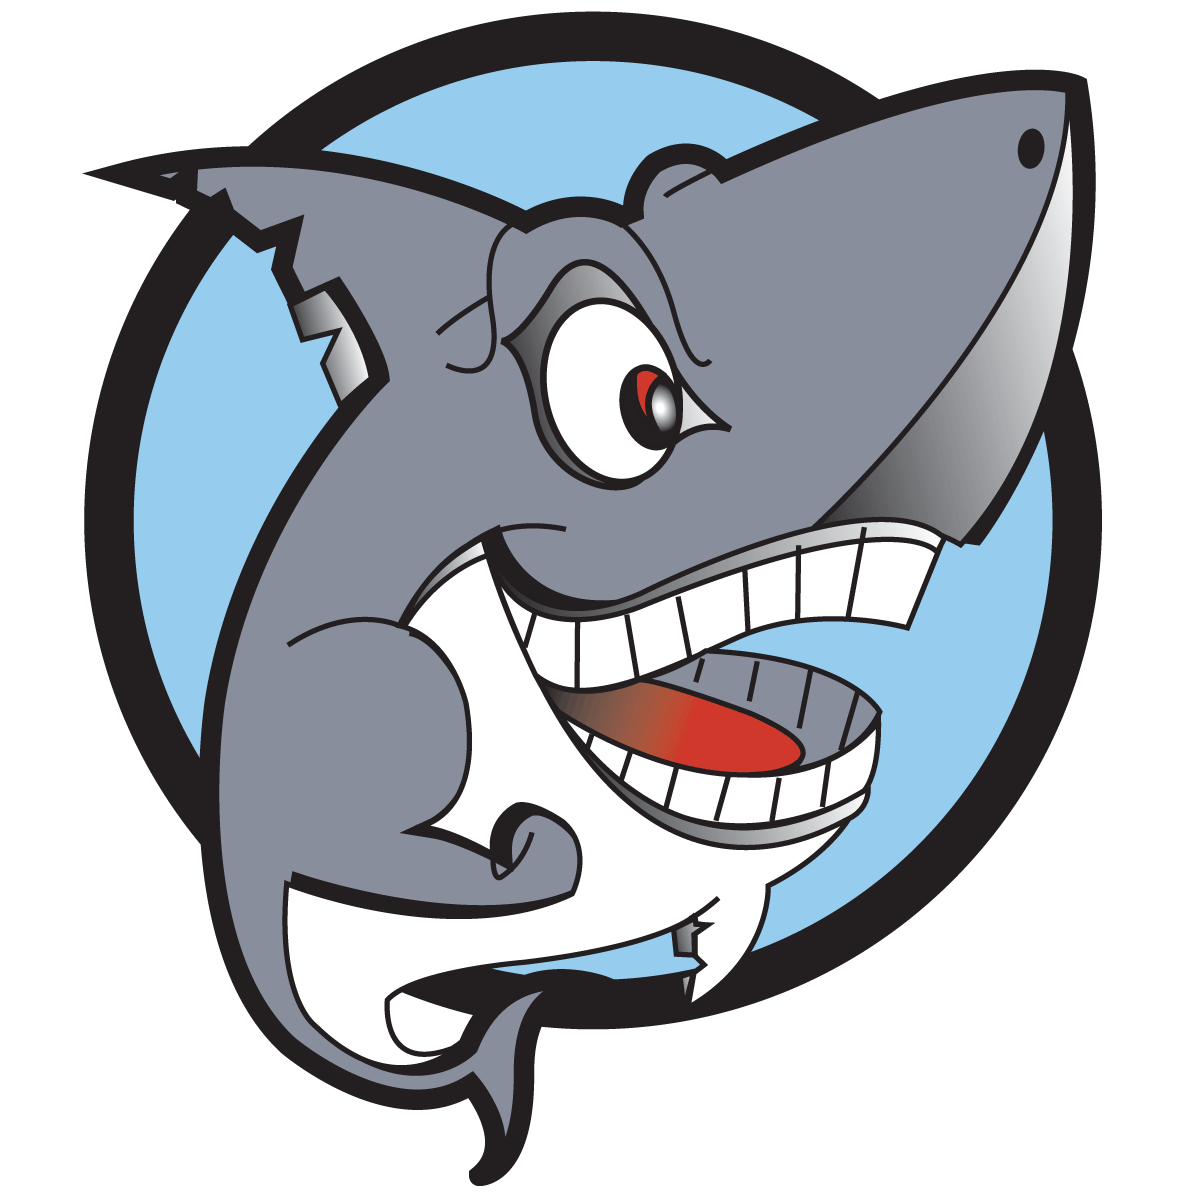 Smiling Shark Clipart   Clipart Panda   Free Clipart Images